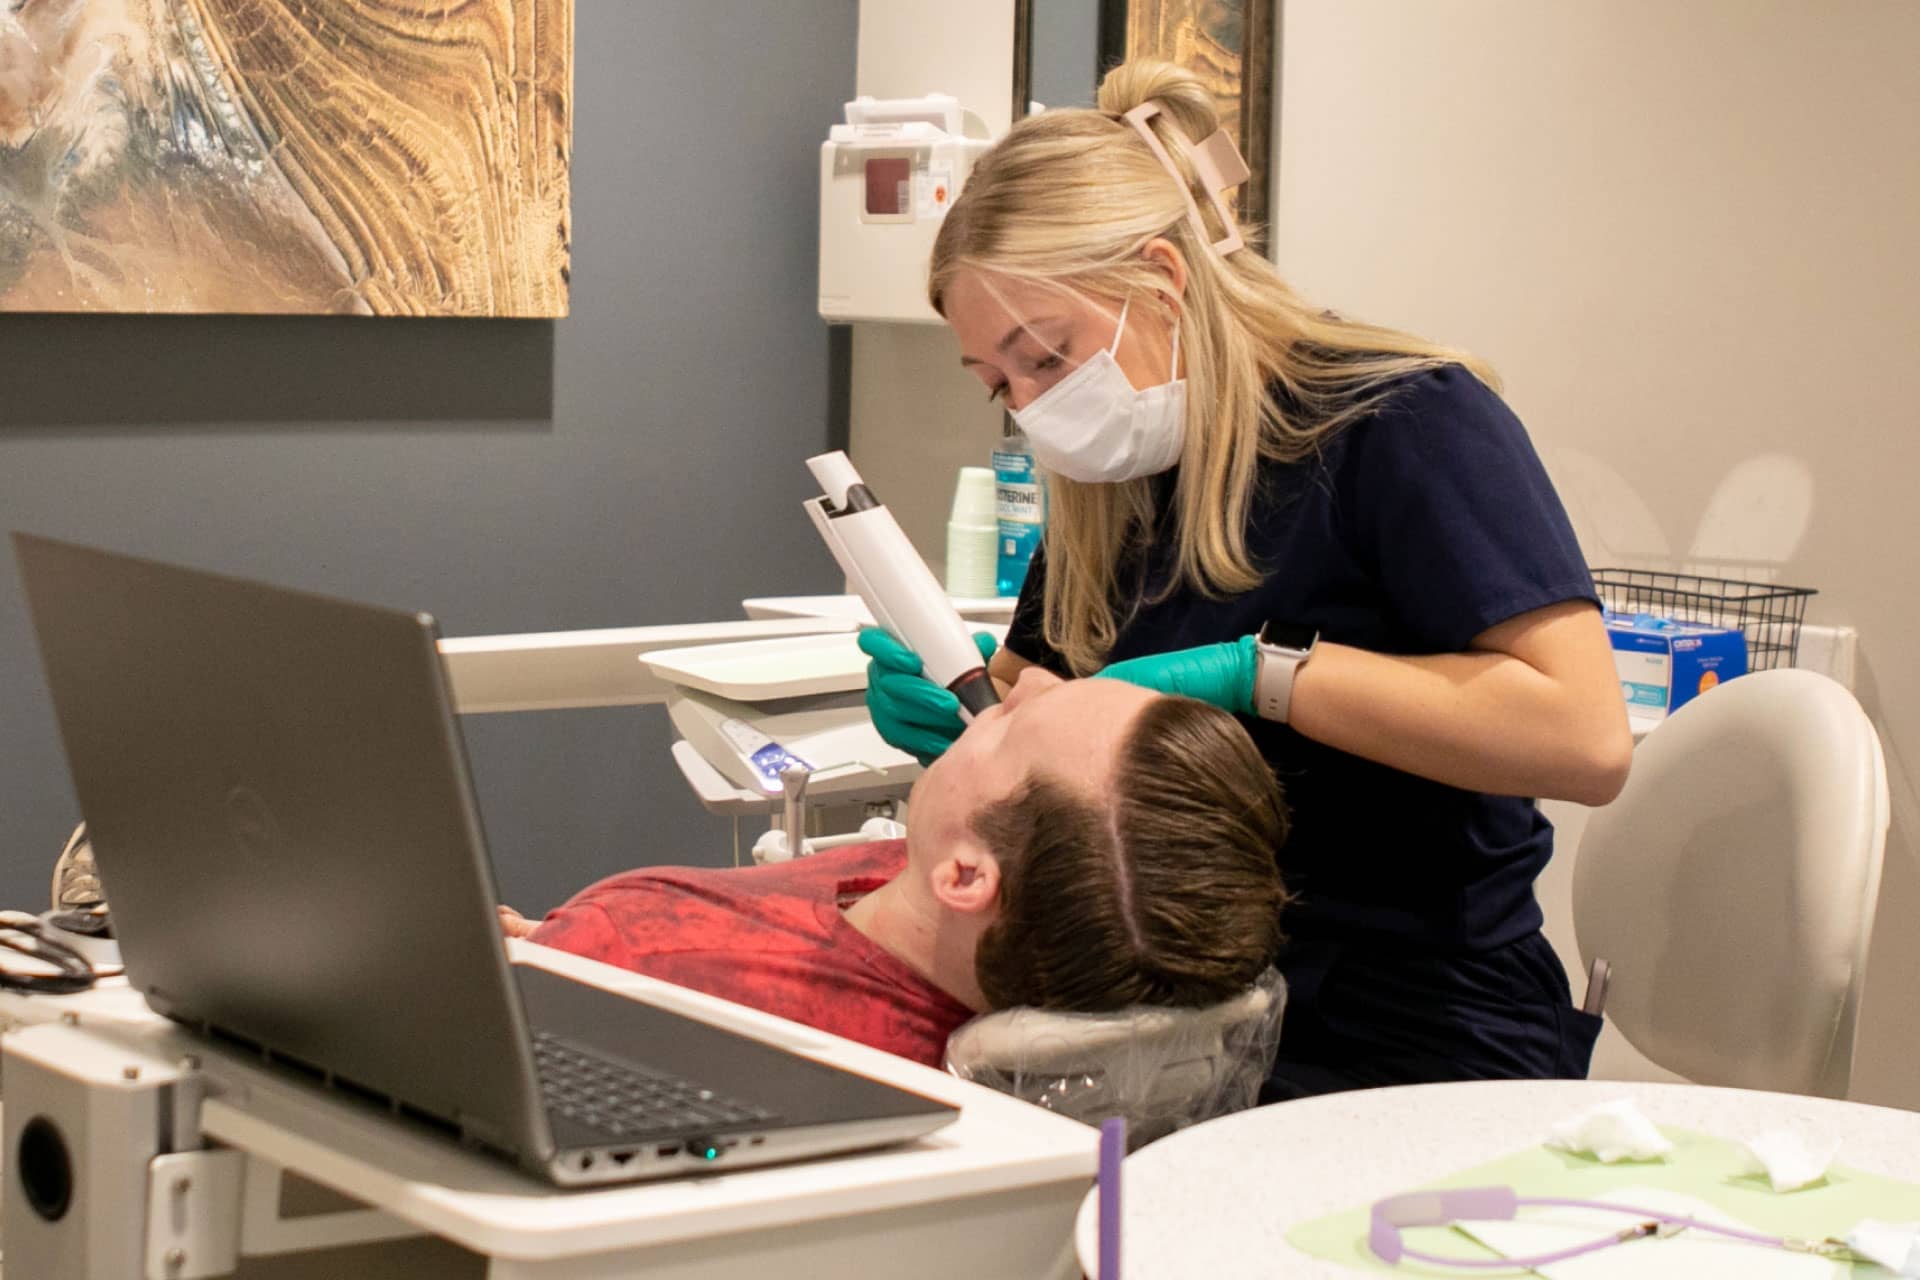 dental assistant using intraoral camera on patient in exam room